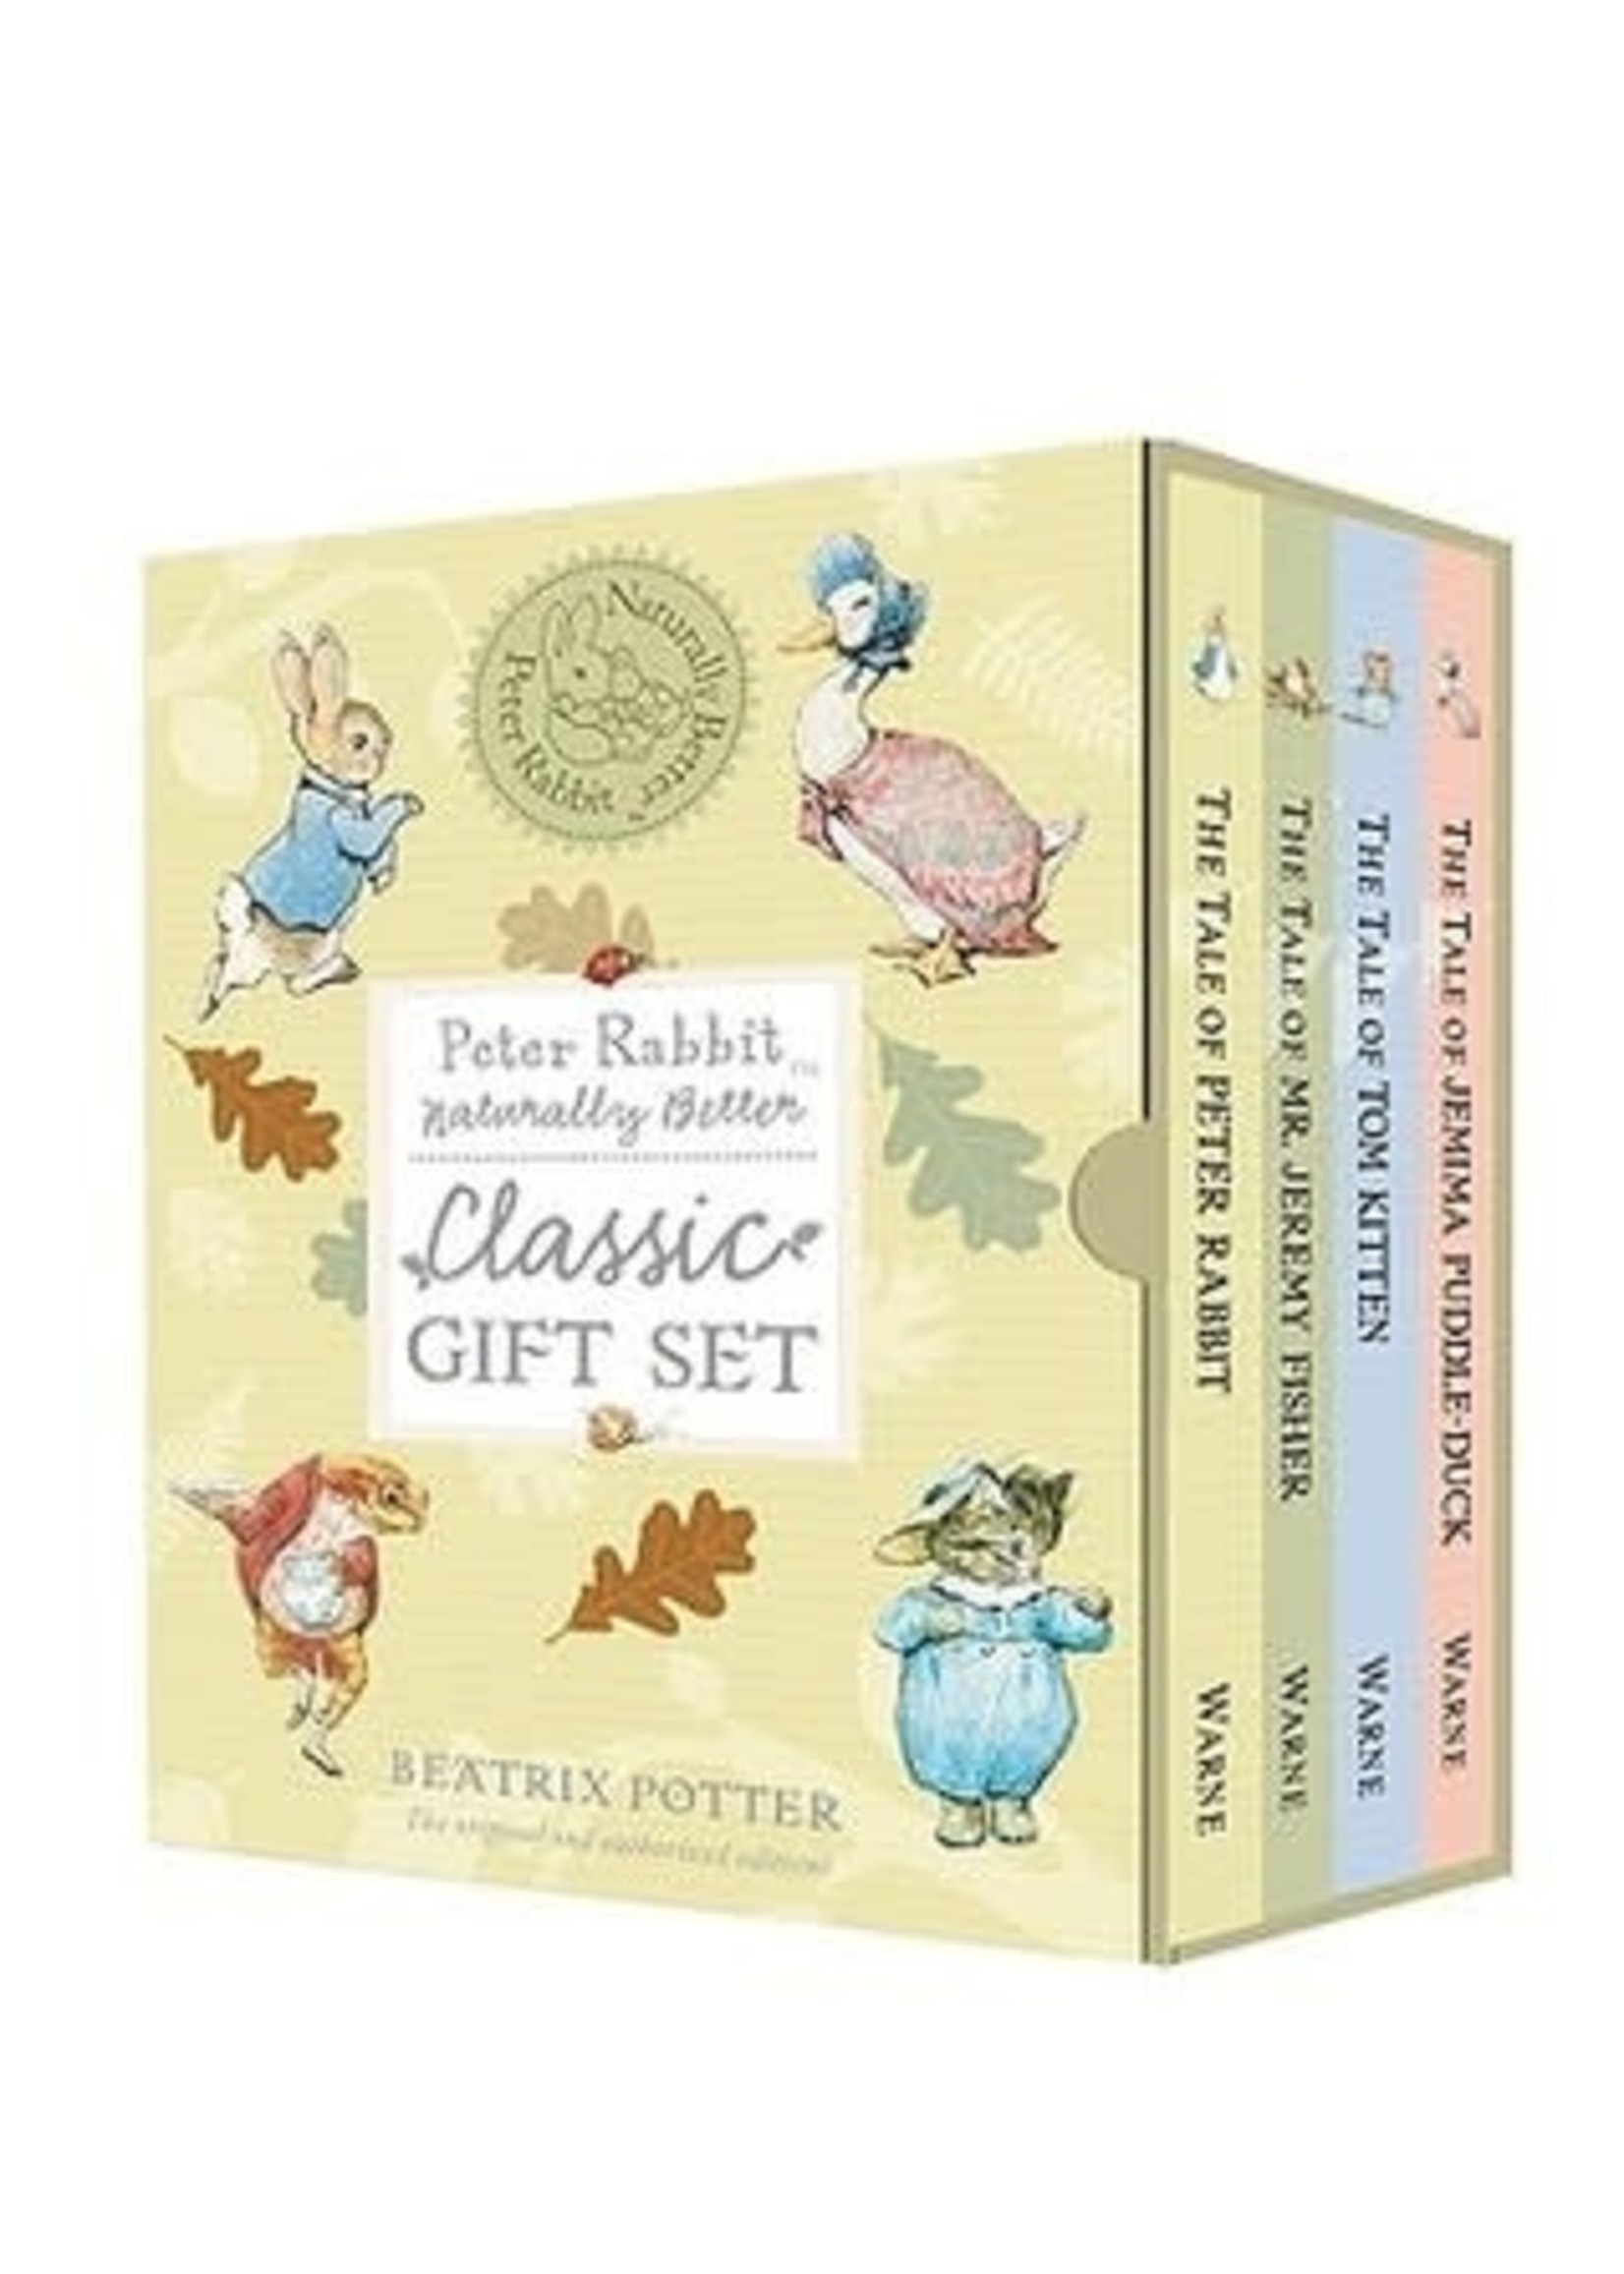 Peter Rabbit Naturally Better Classic Gift Set by Beatrix Potter